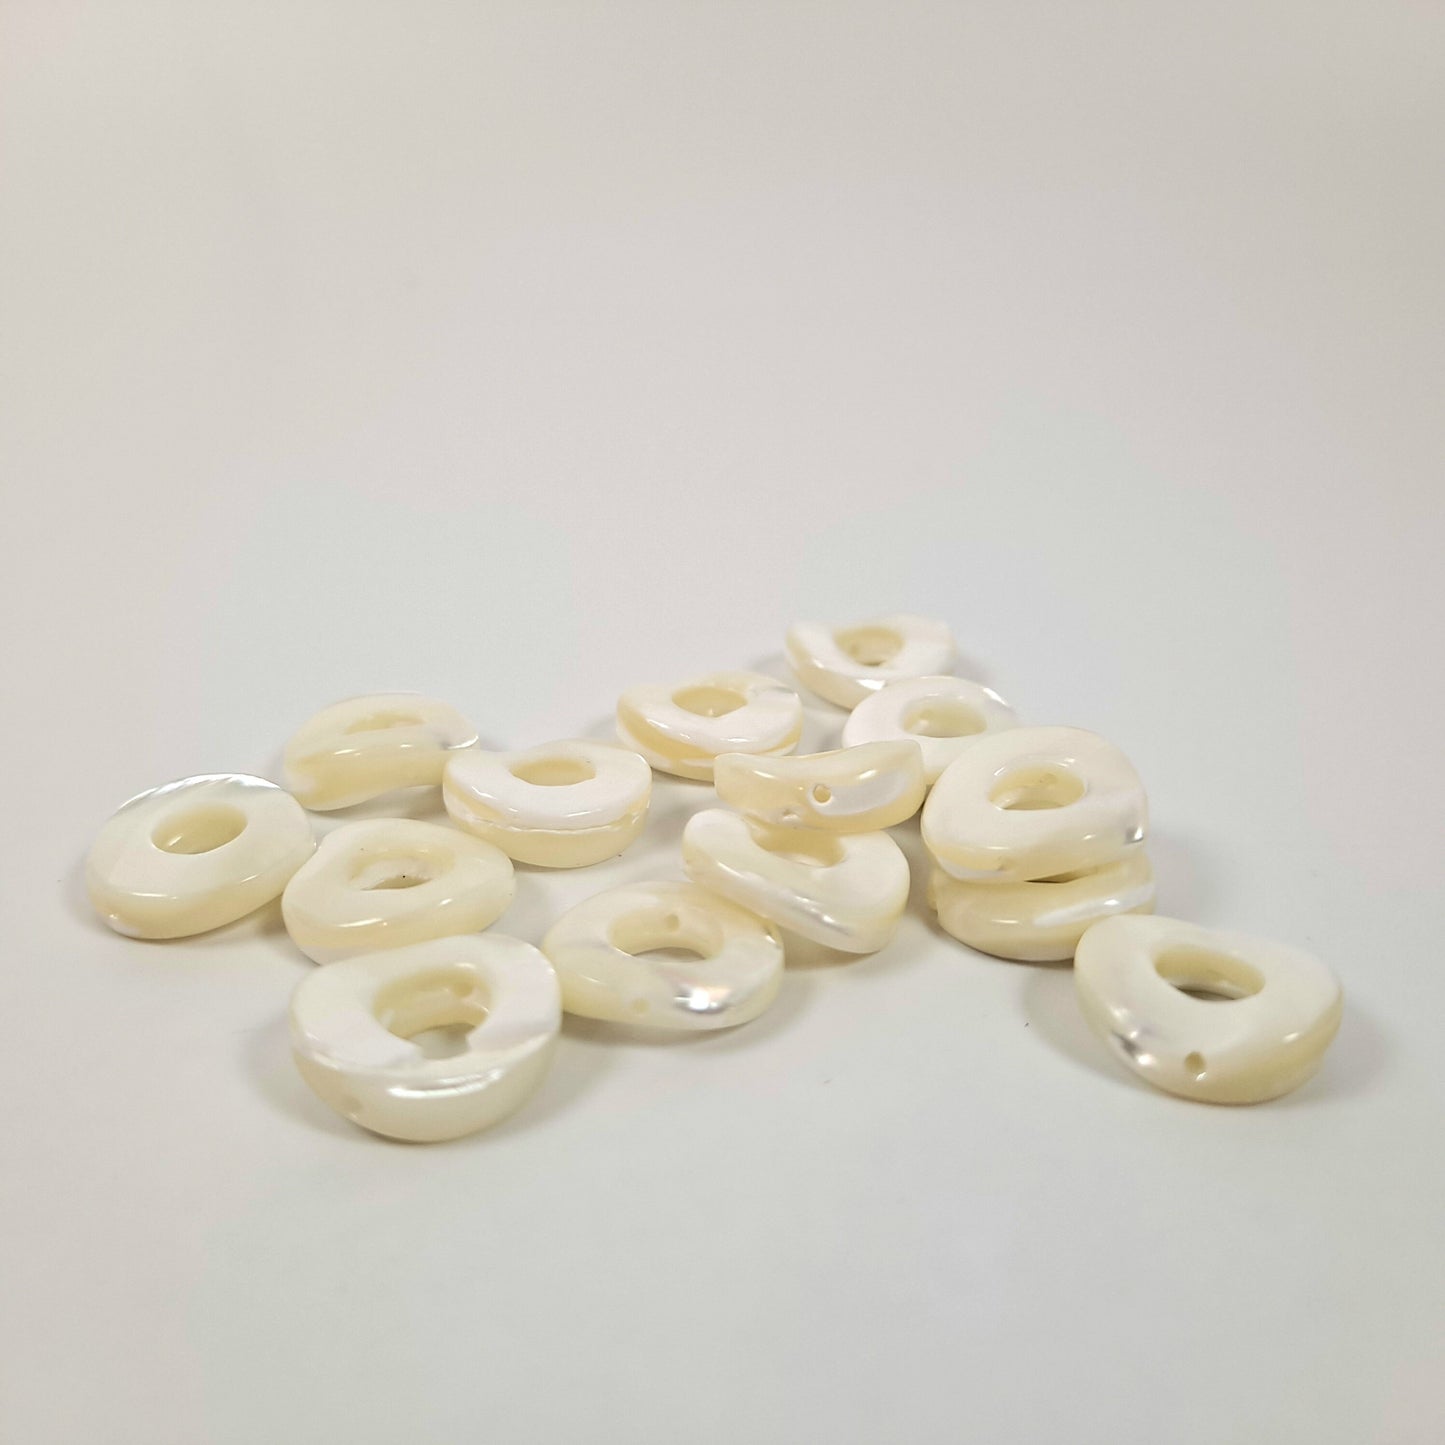 Mother of Pearl Dread Bead Rings, 2 Pack - 6mm bead hole - Shell Dread Beads, White Mother of Pearl Beads  Stone Dread Beads